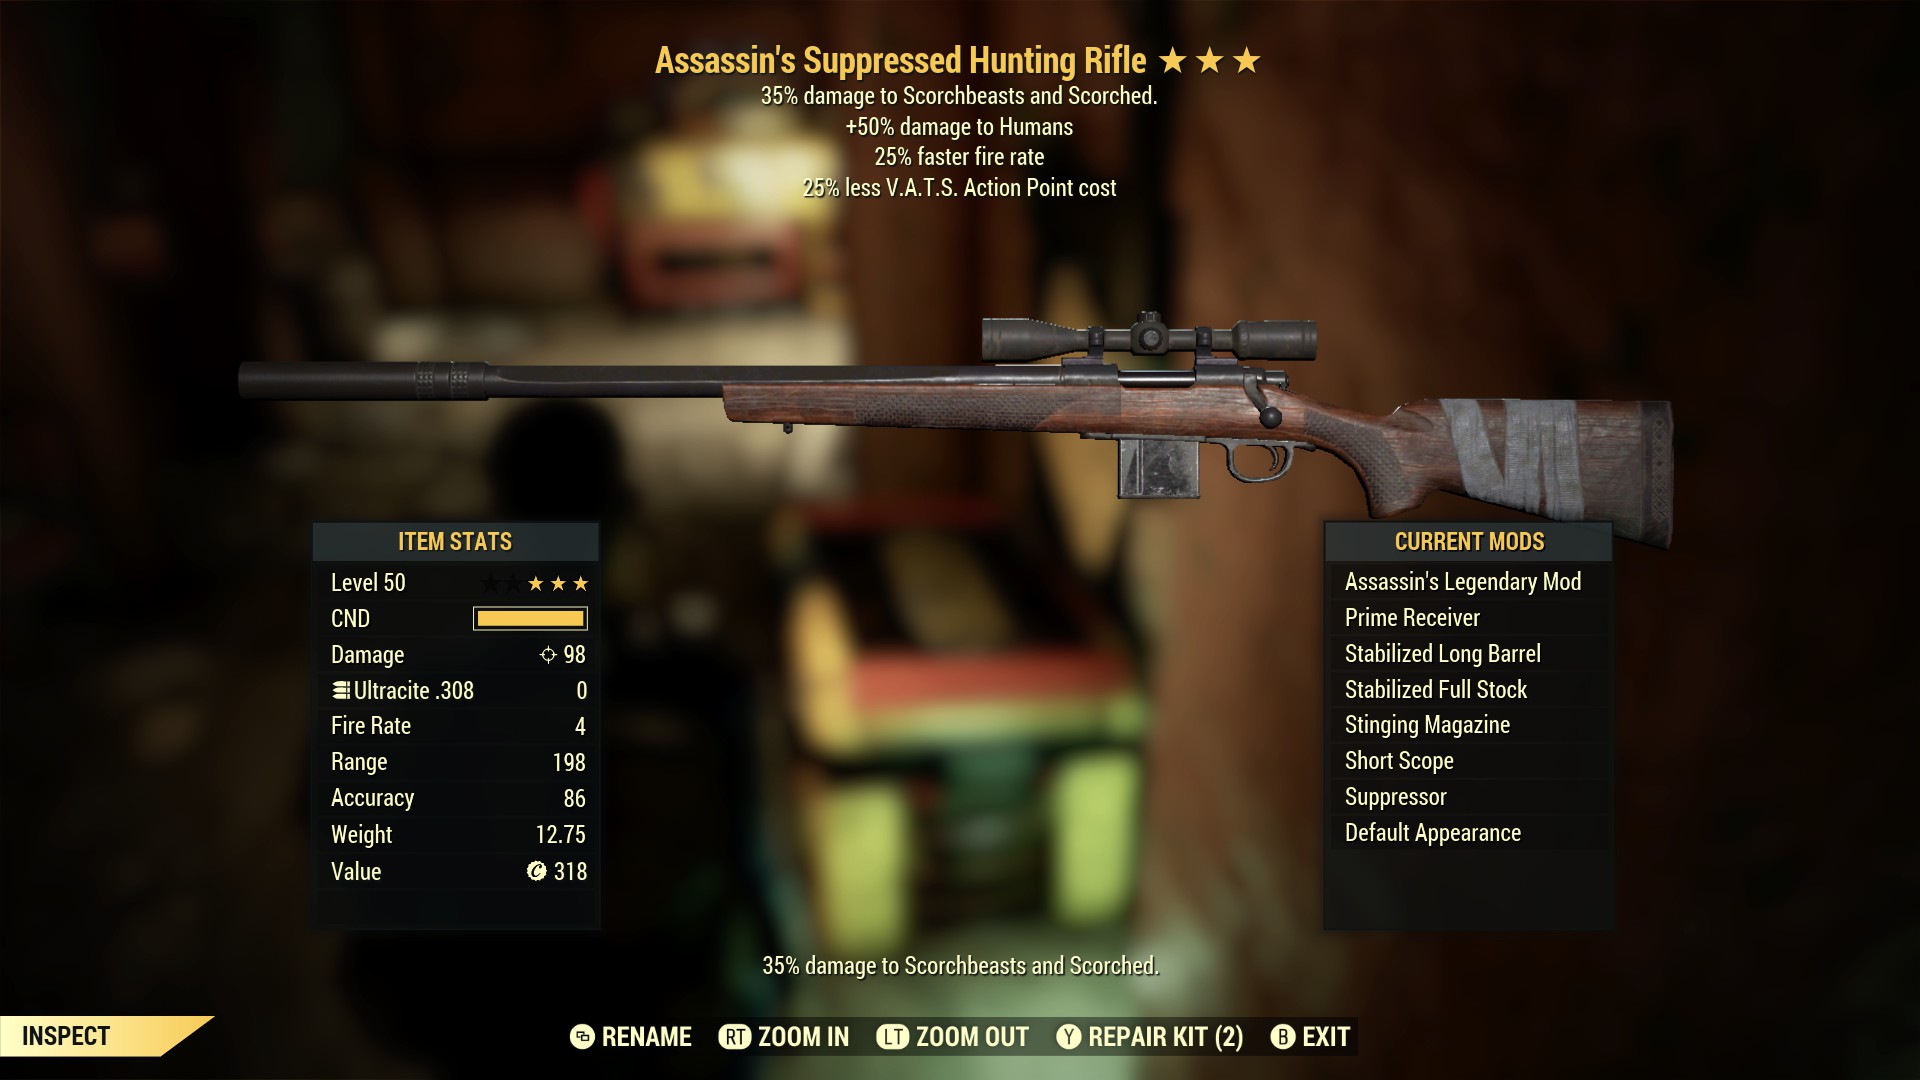 Assassin's Suppressed Hunting Rifle